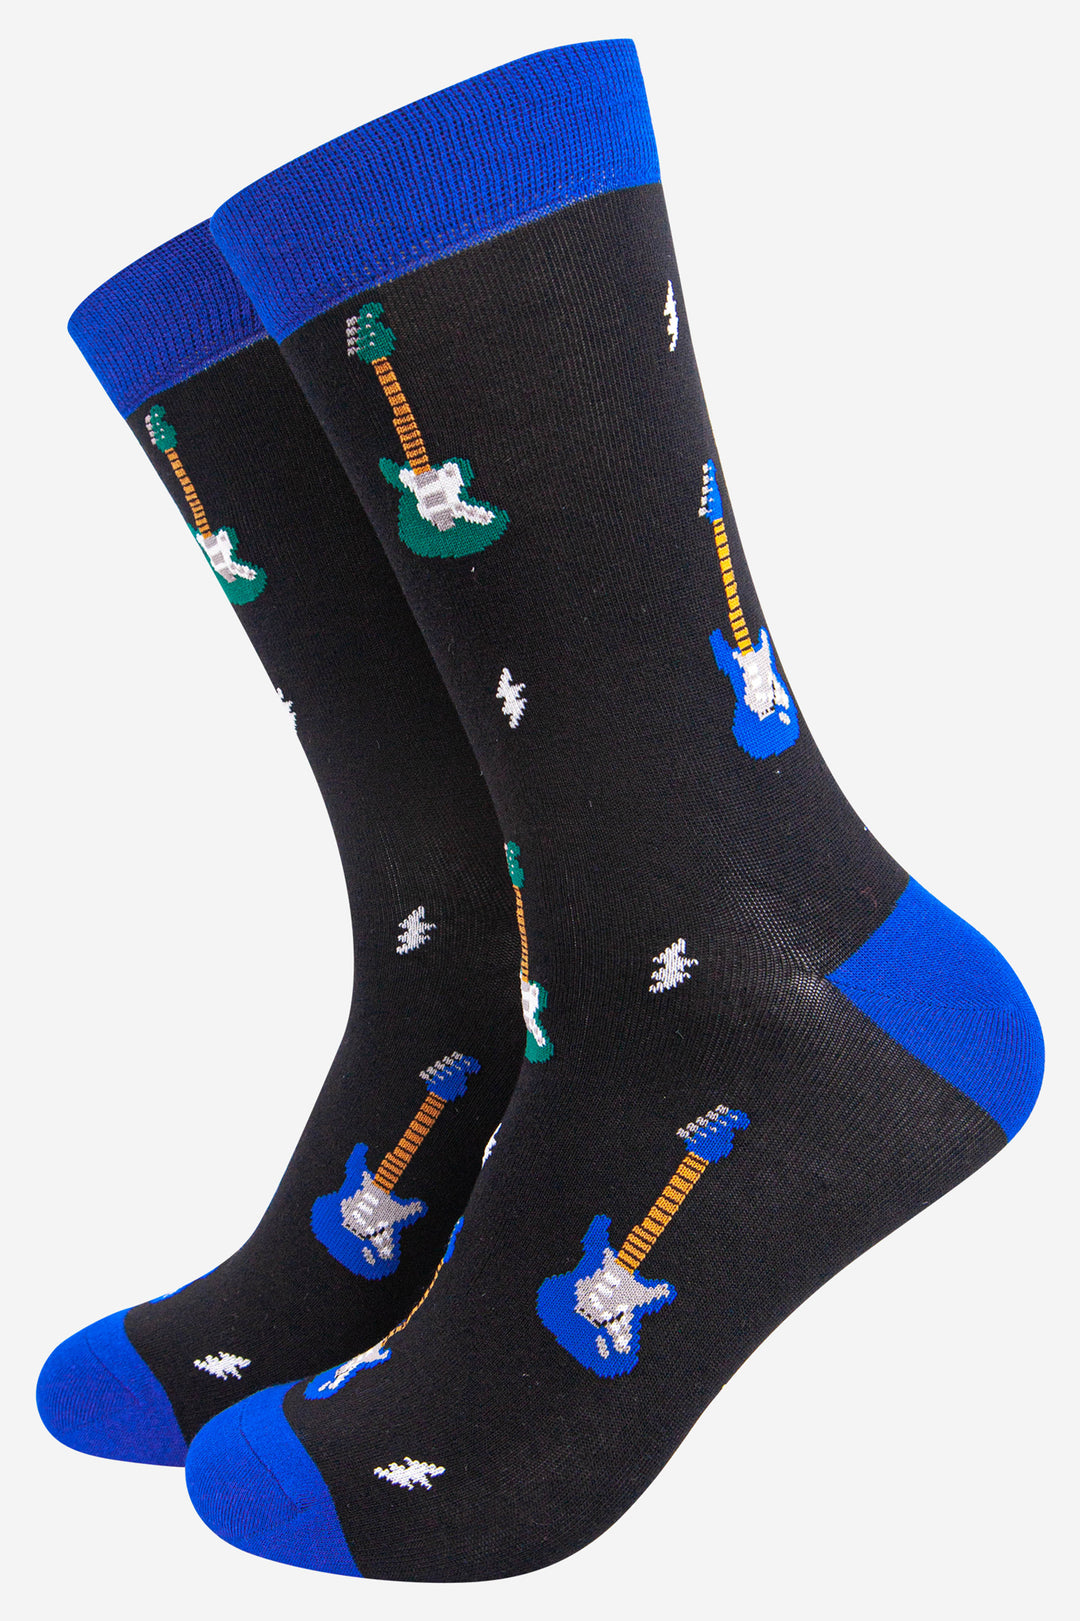 black bamboo dress socks with blue heel, toe and cuff and featuring an all over electric guitar and lightning bolt pattern